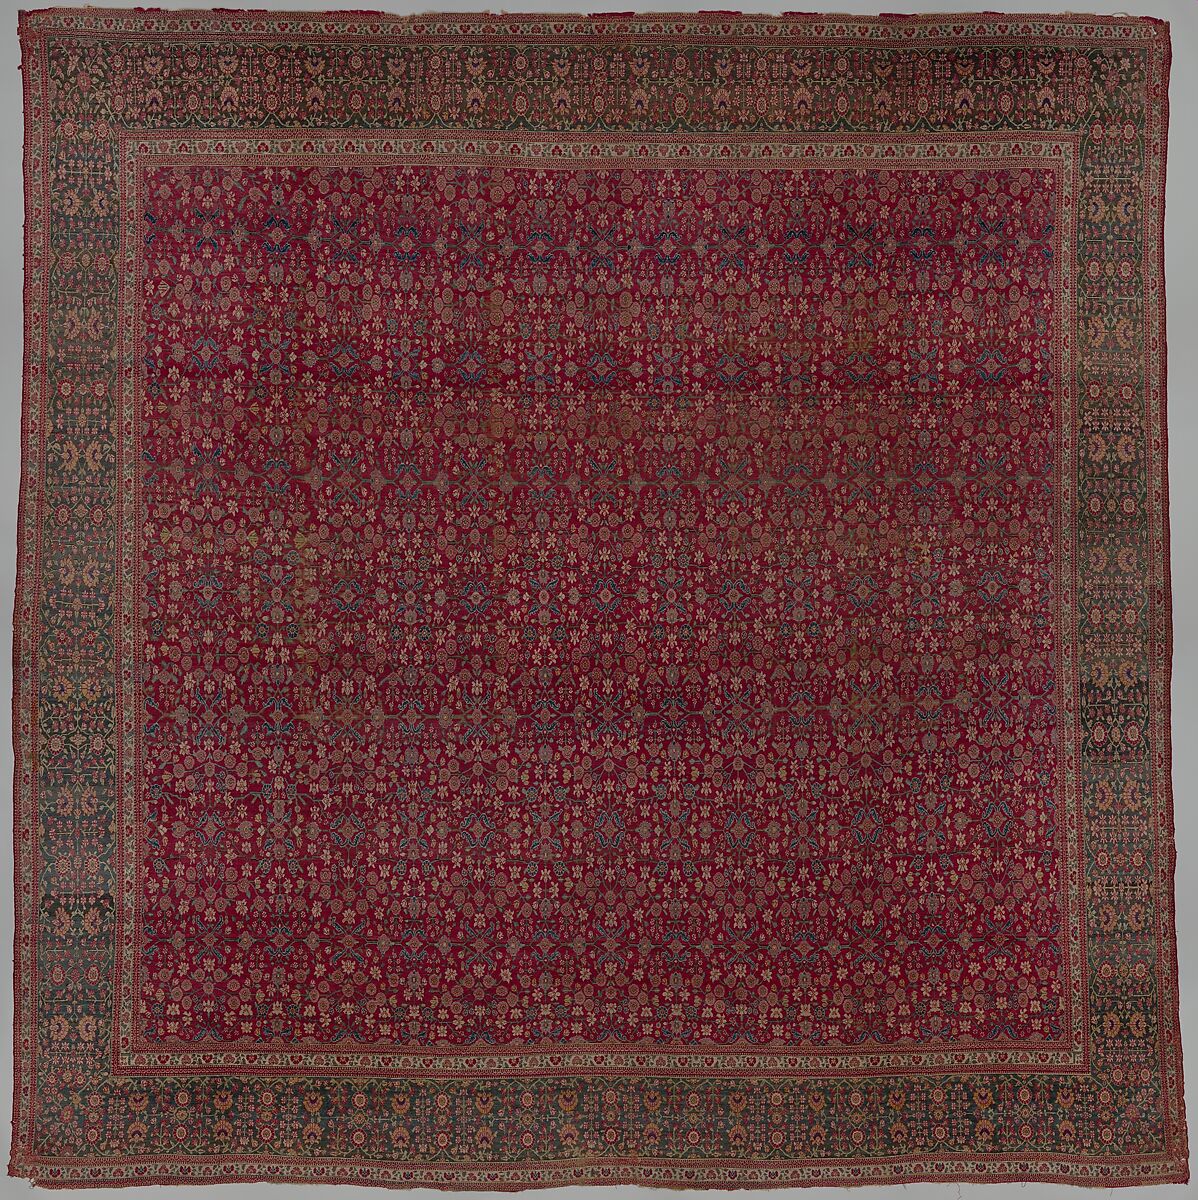 Carpet with a millefleur pattern, Wool (probably pashmina) pile on cotton and silk foundation., Indian, Kashmir 